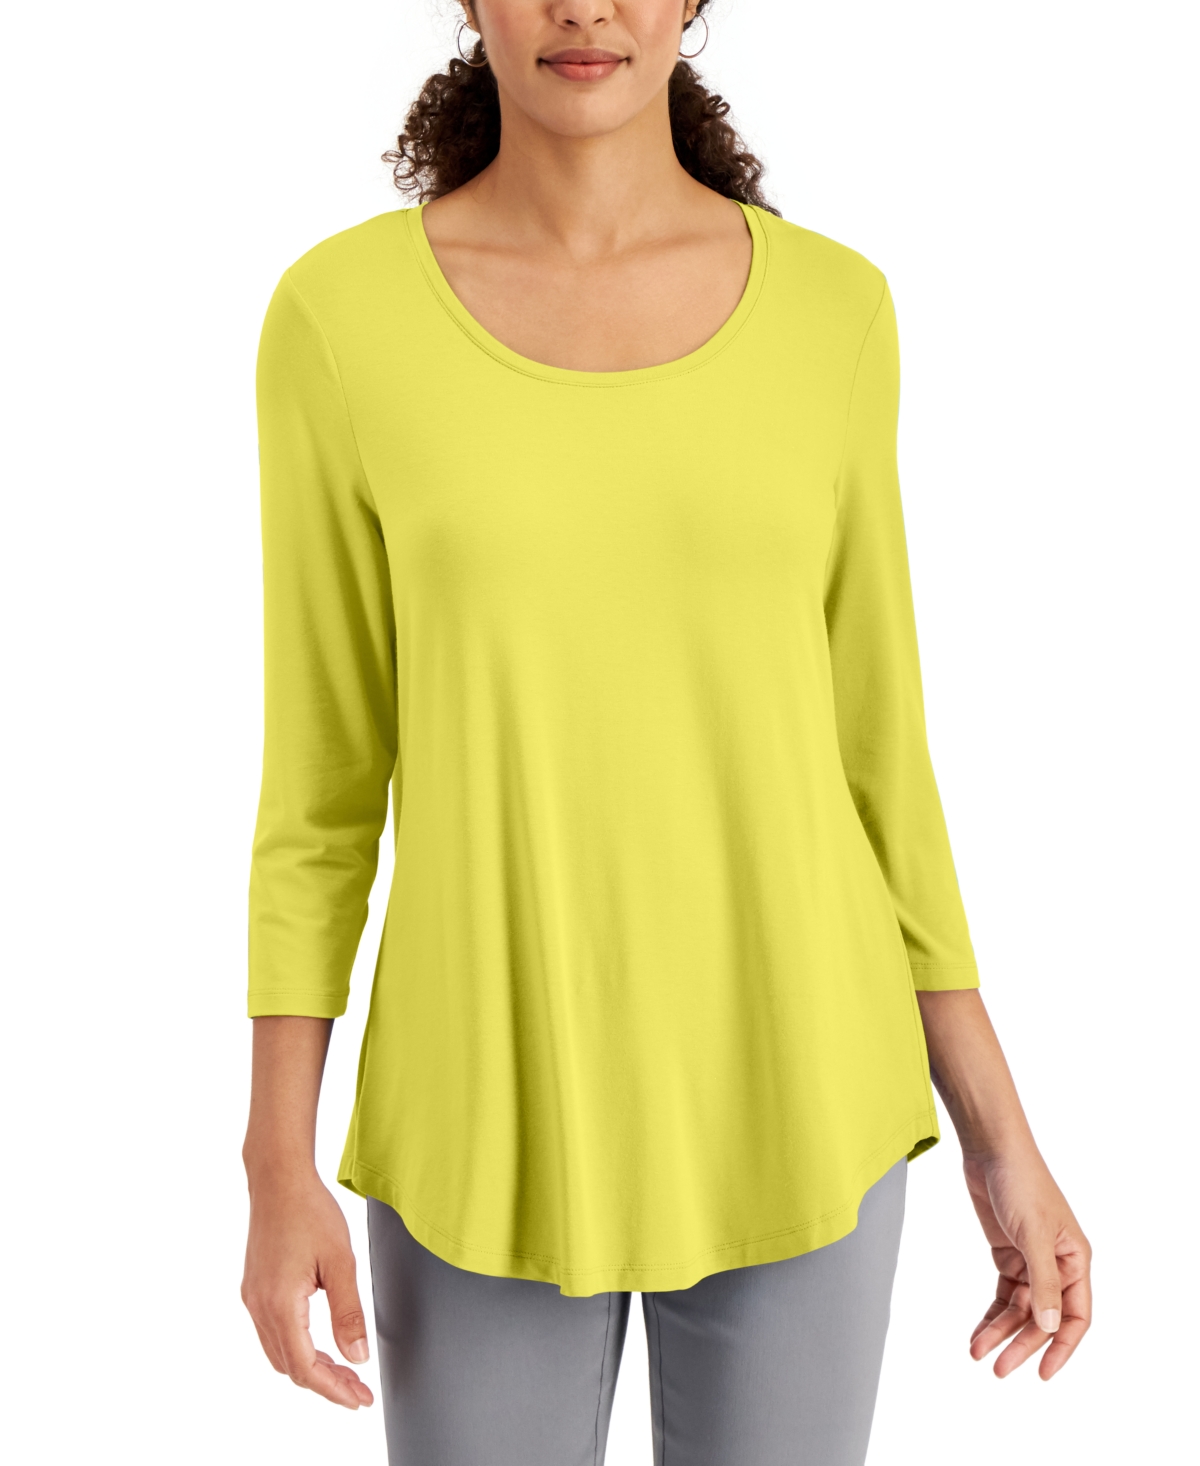 Jm Collection 3/4-Sleeve Solid Top, Created for Macy's